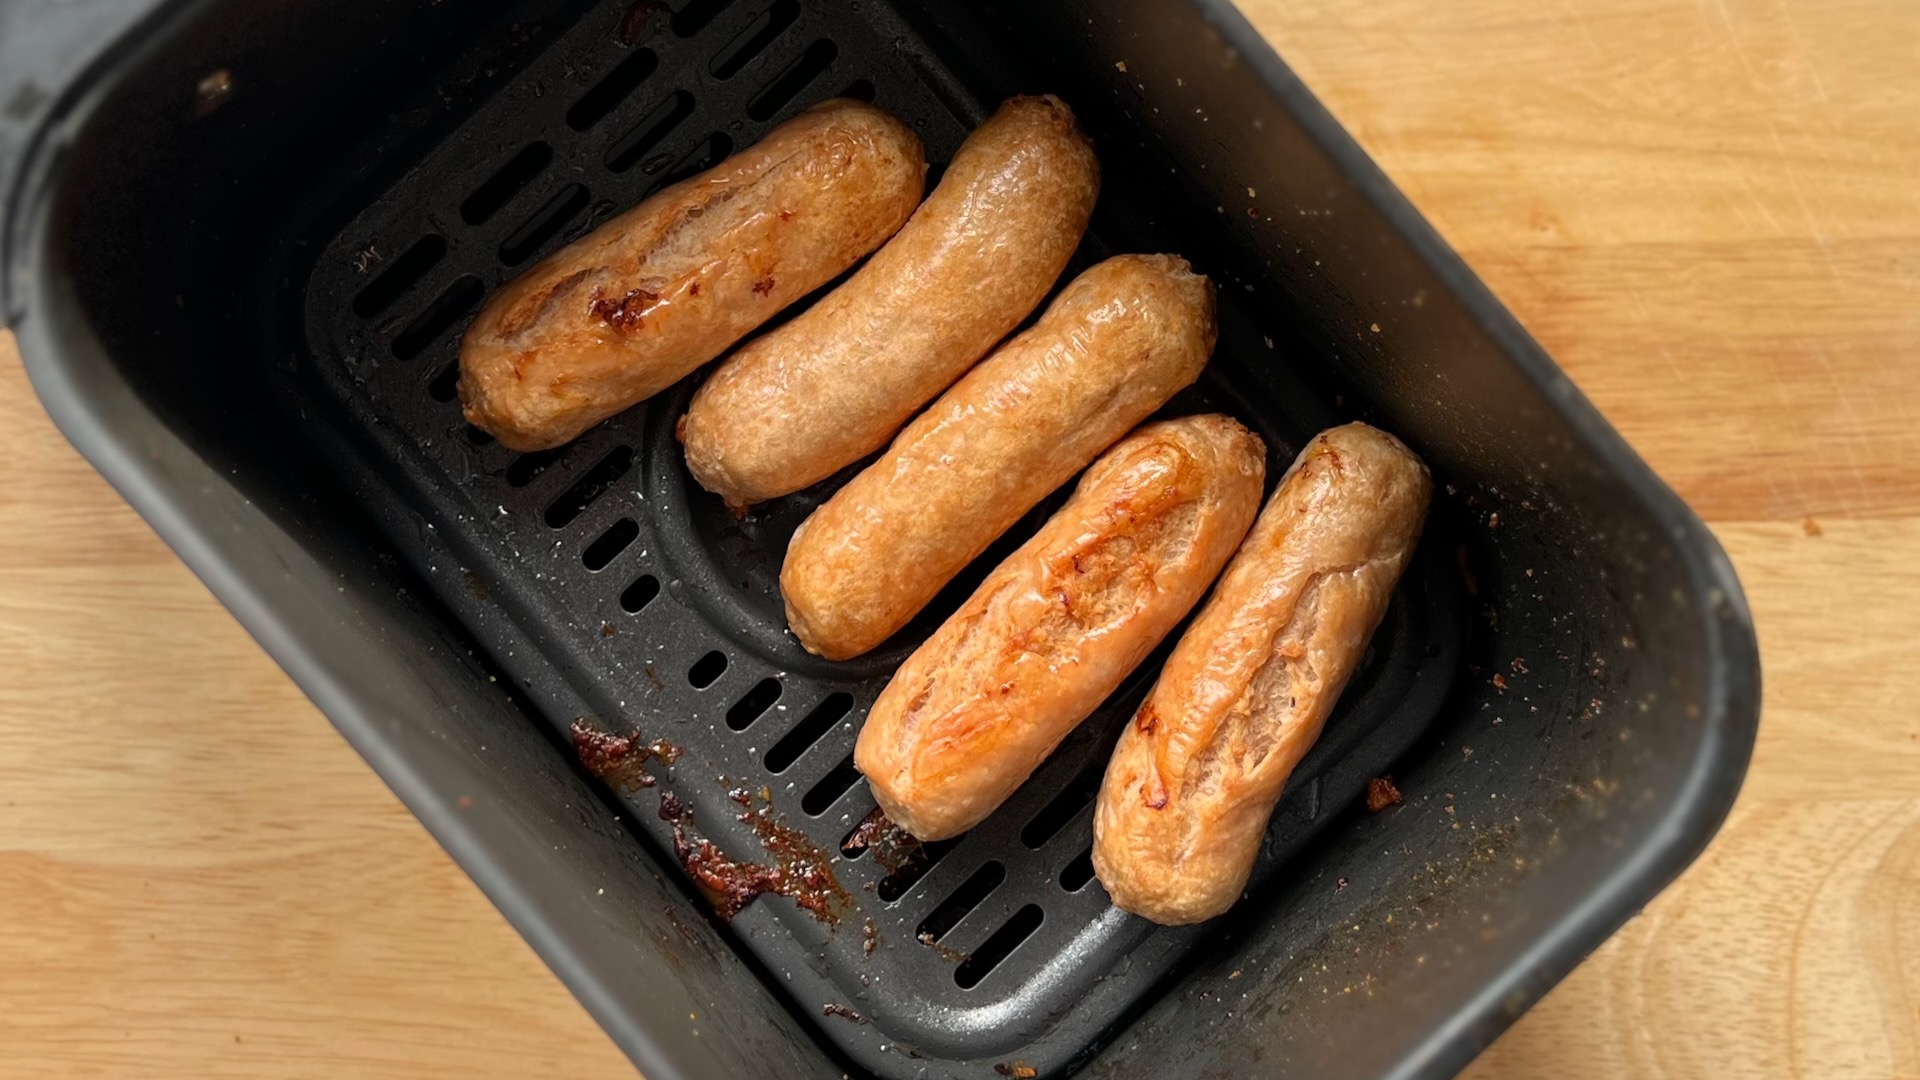 Frozen sausages in the air fryer